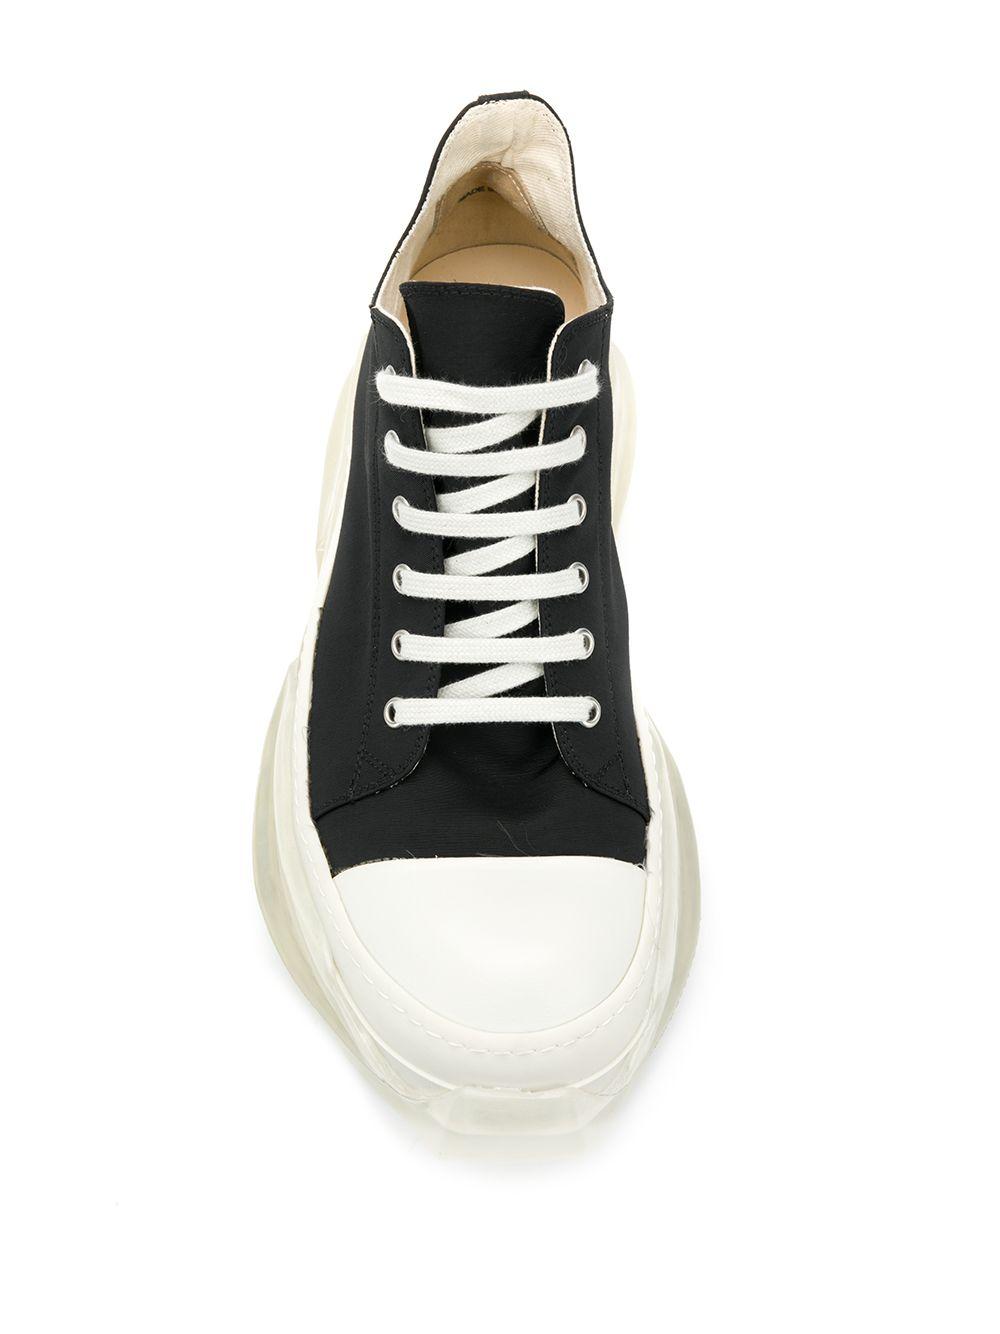 Rick Owens Drkshdw Canvas Clear Sole Mid-top Sneakers in Black for Men ...